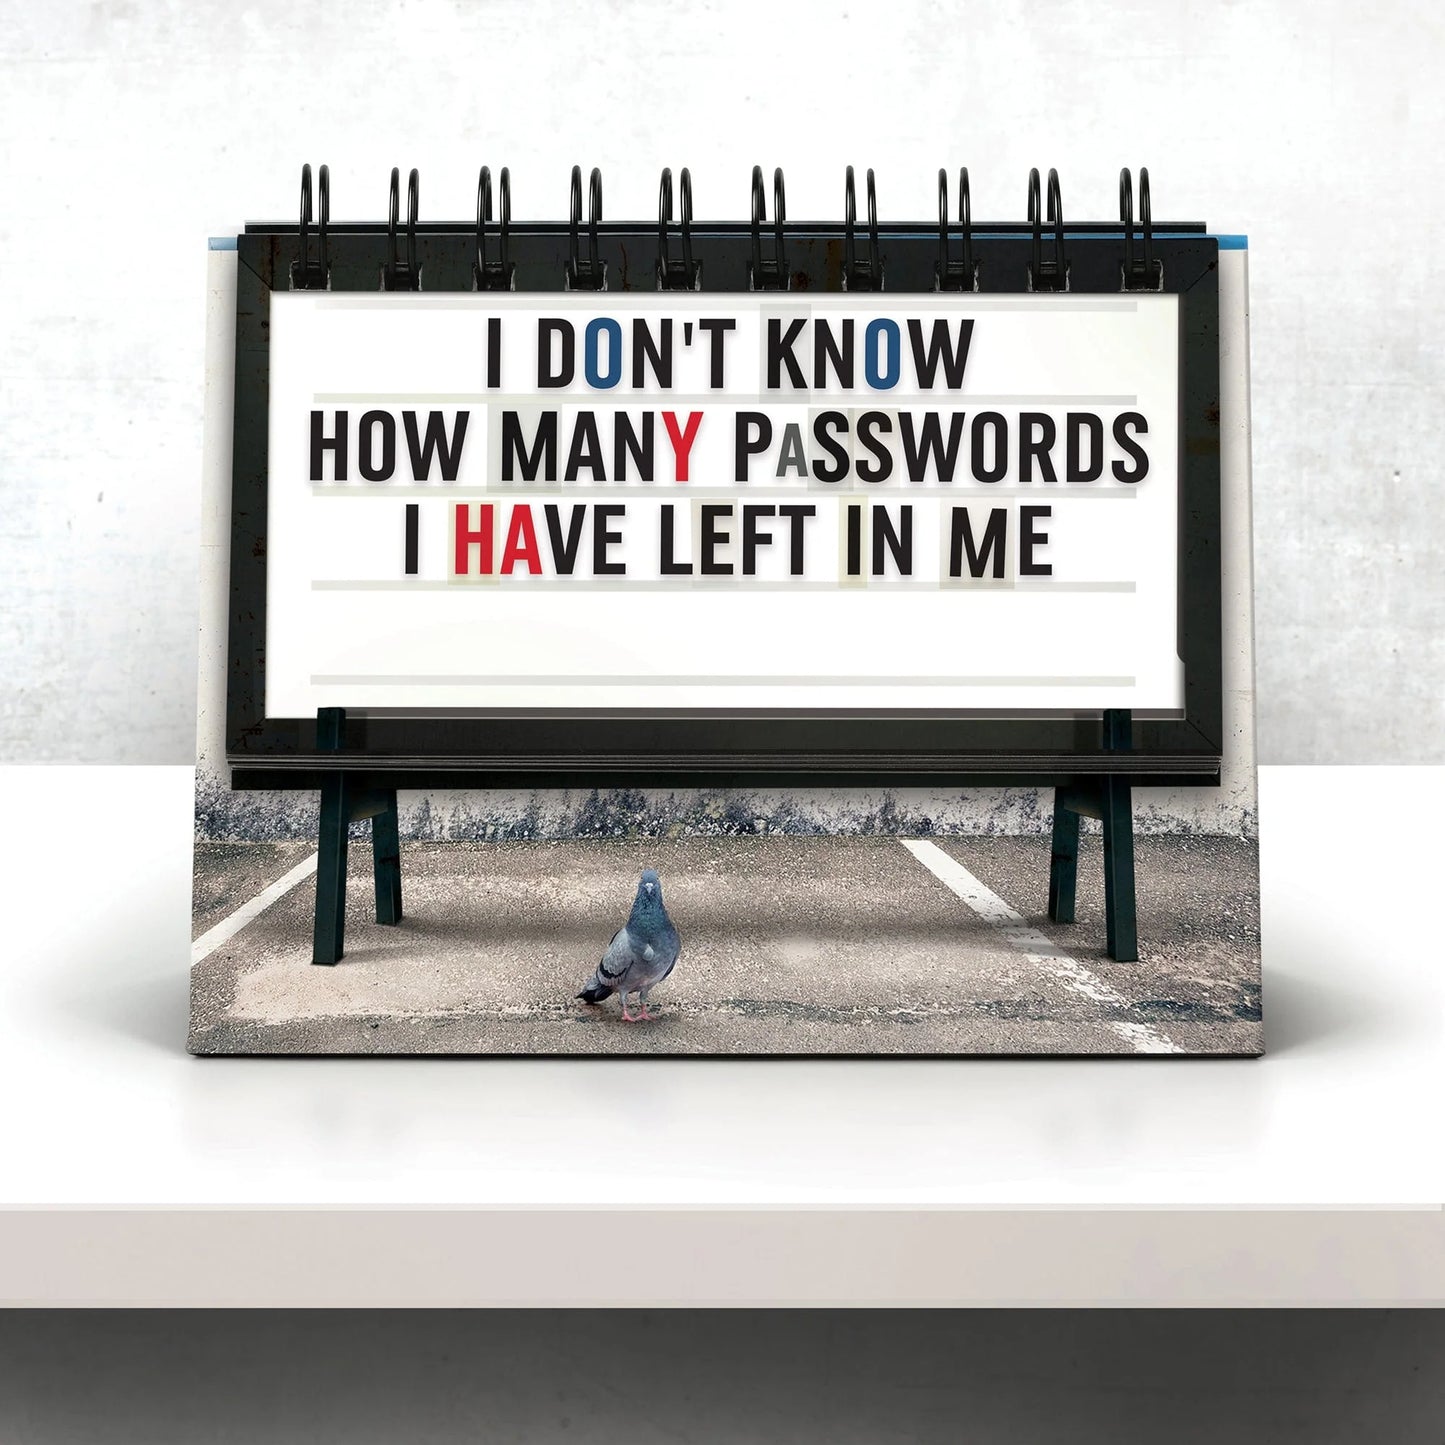 daily marquee flipped to sign reading "i don't know how many passwords i have left in me"